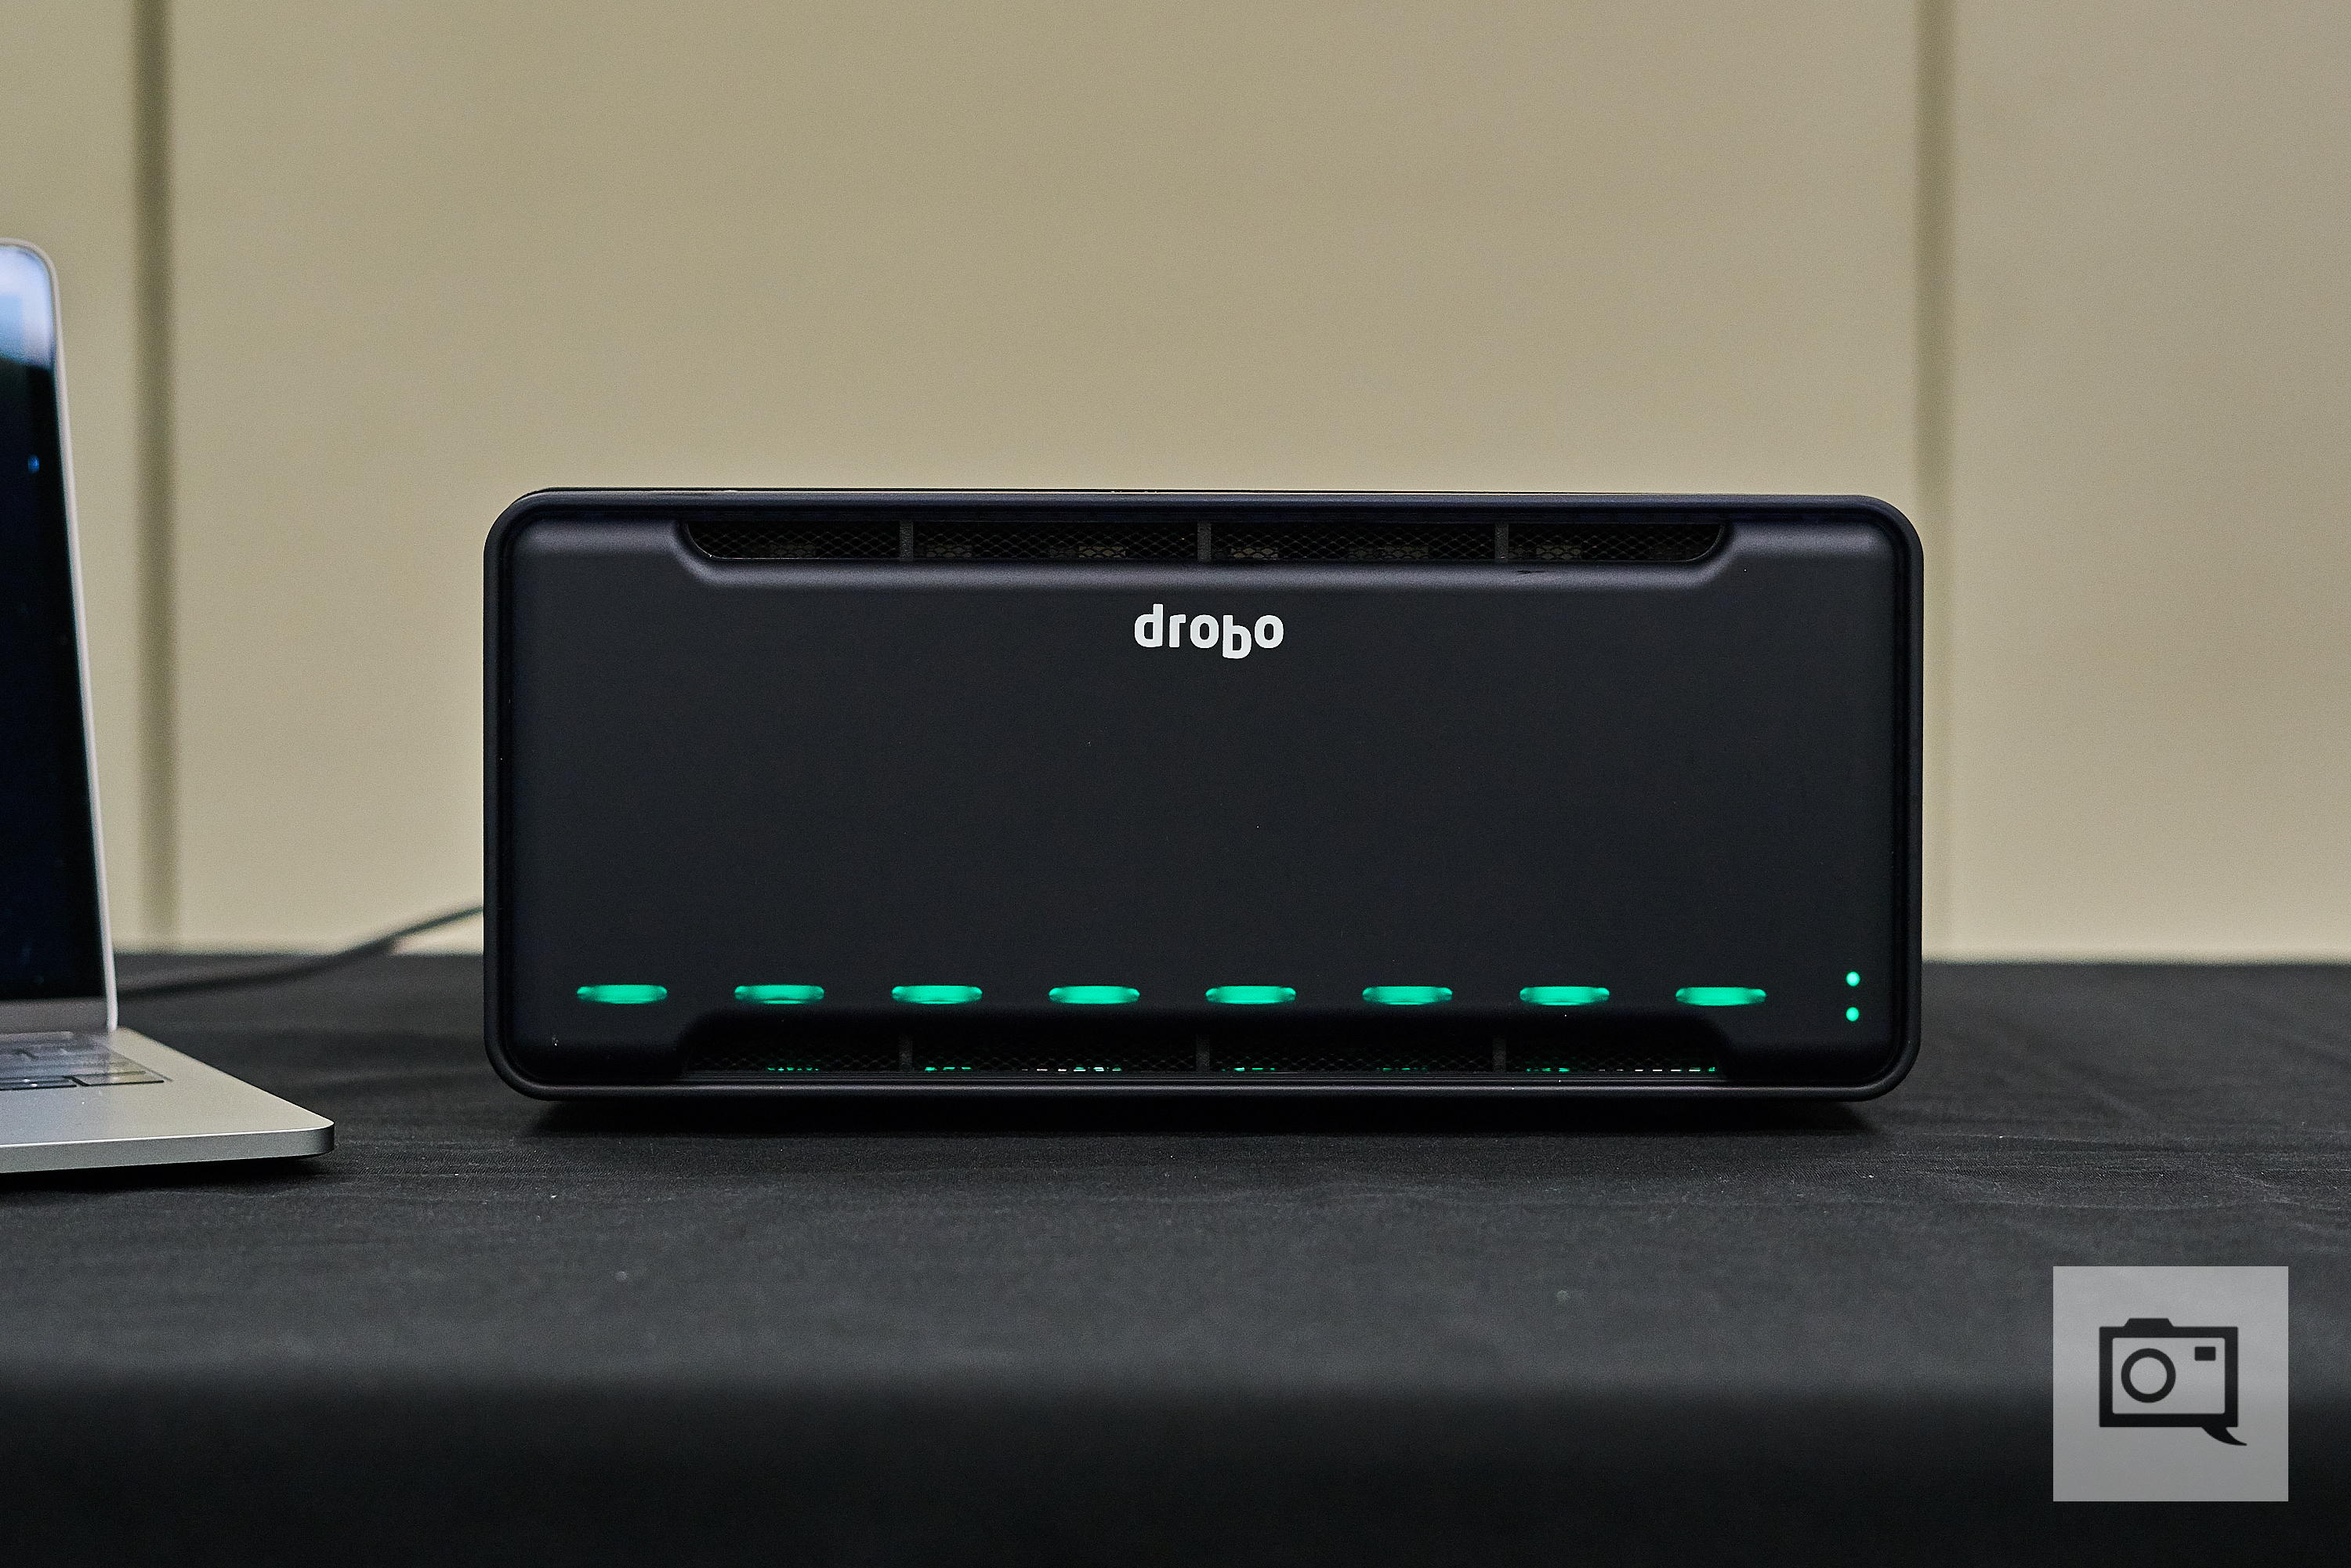 New Drobo 8D Includes Thunderbolt 3 and Intelligent Volume Management